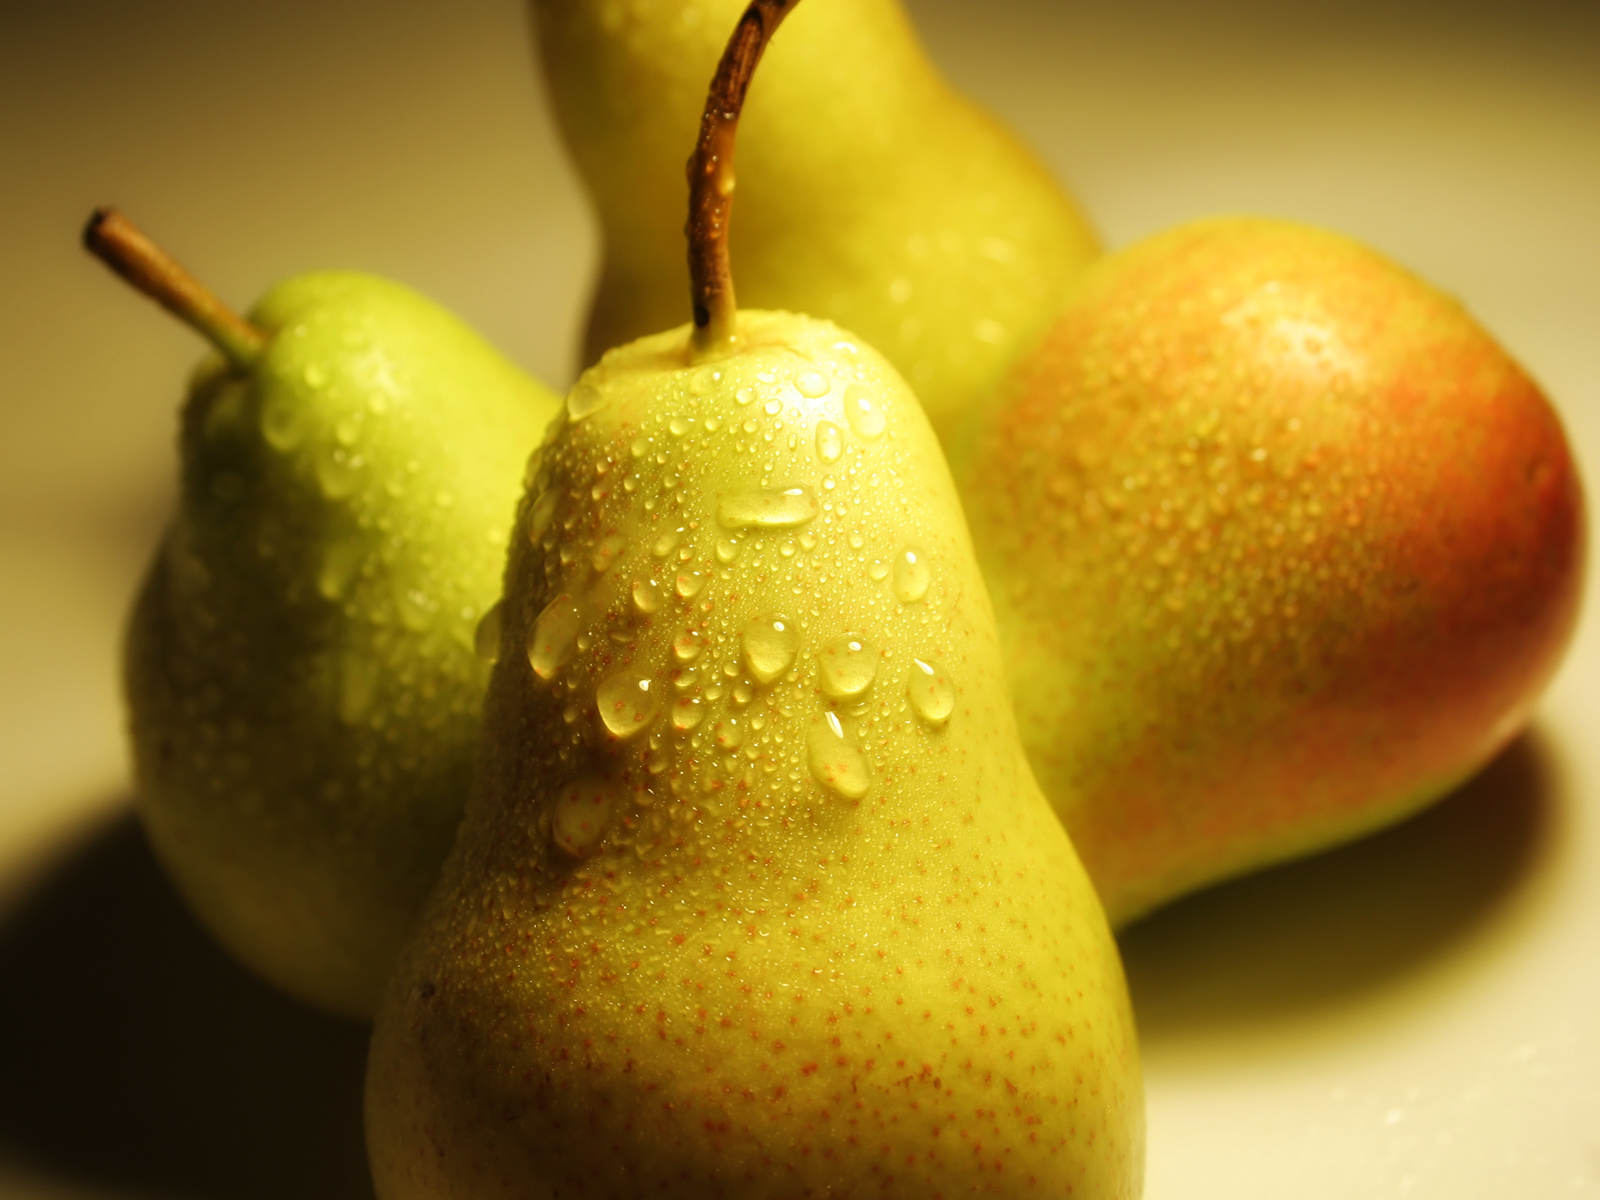 Pears Wallpaper Hd - Pear Wallpaper Hd , HD Wallpaper & Backgrounds